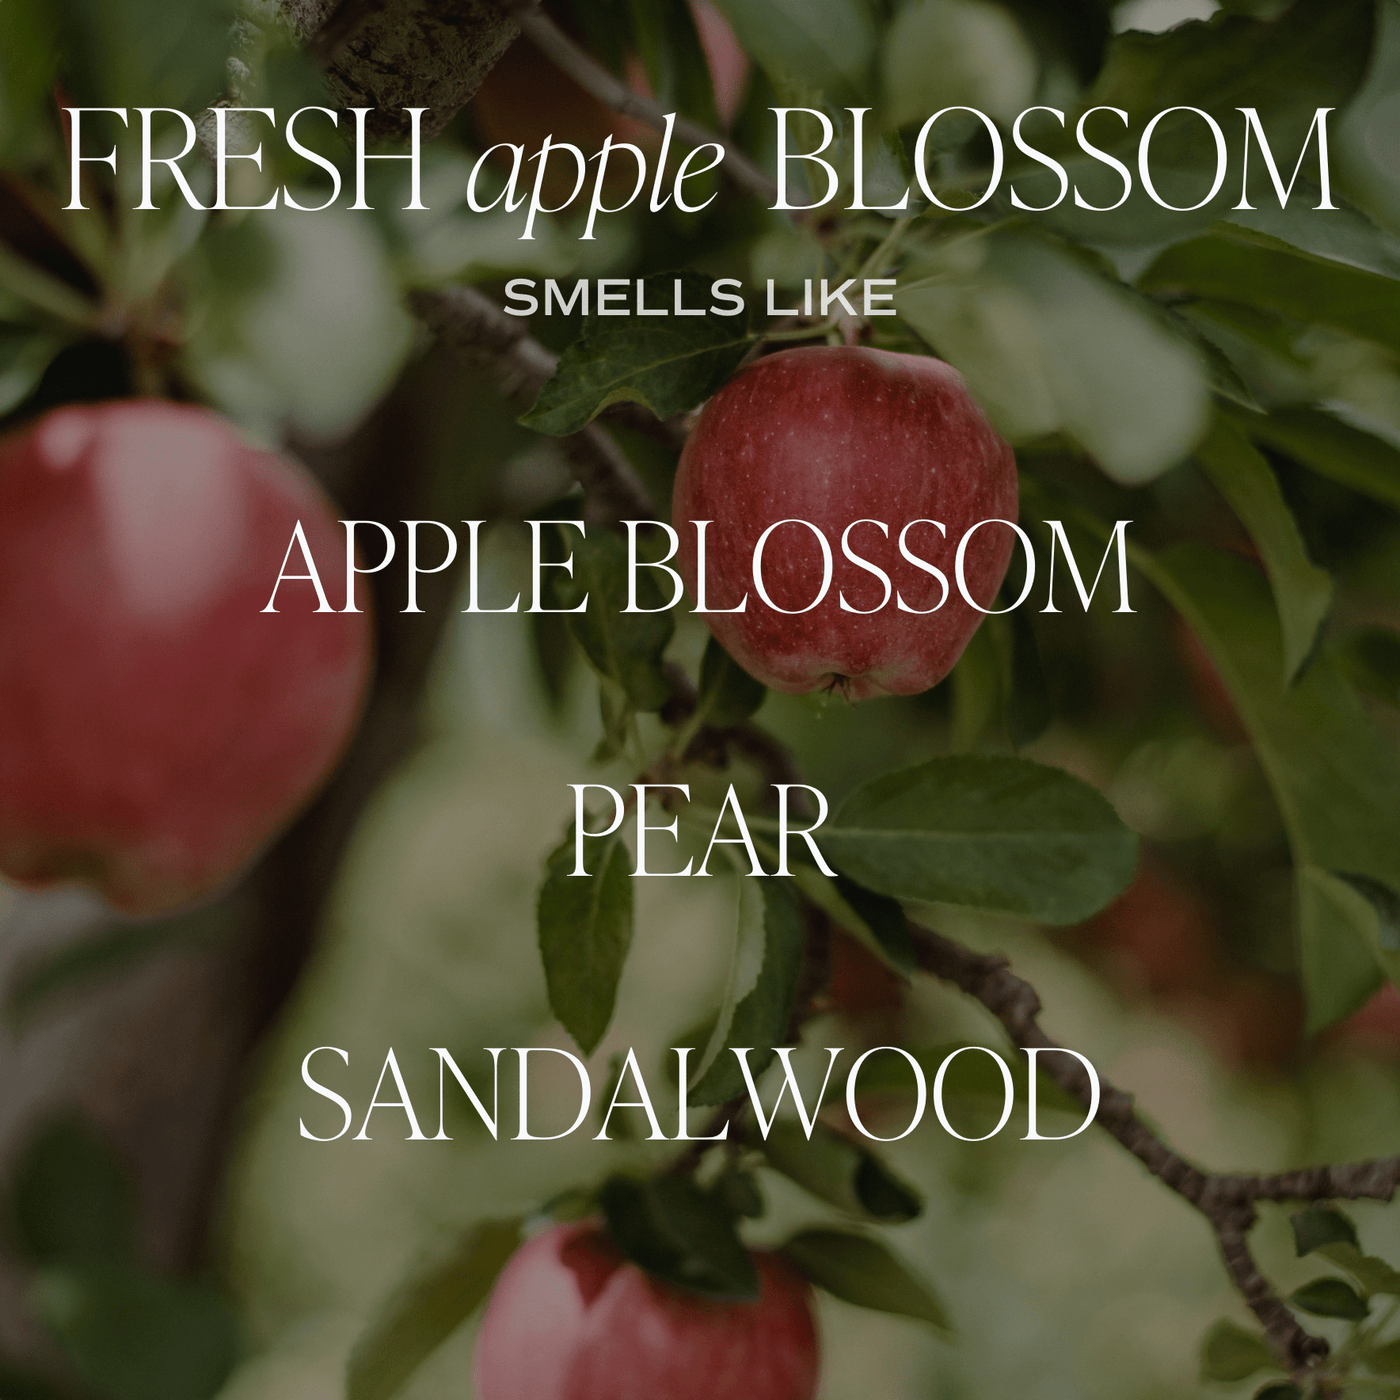 Fresh Apple Blossom Soy Candle - Amber Jar - 9 oz - Sweet Water Decor - Candles